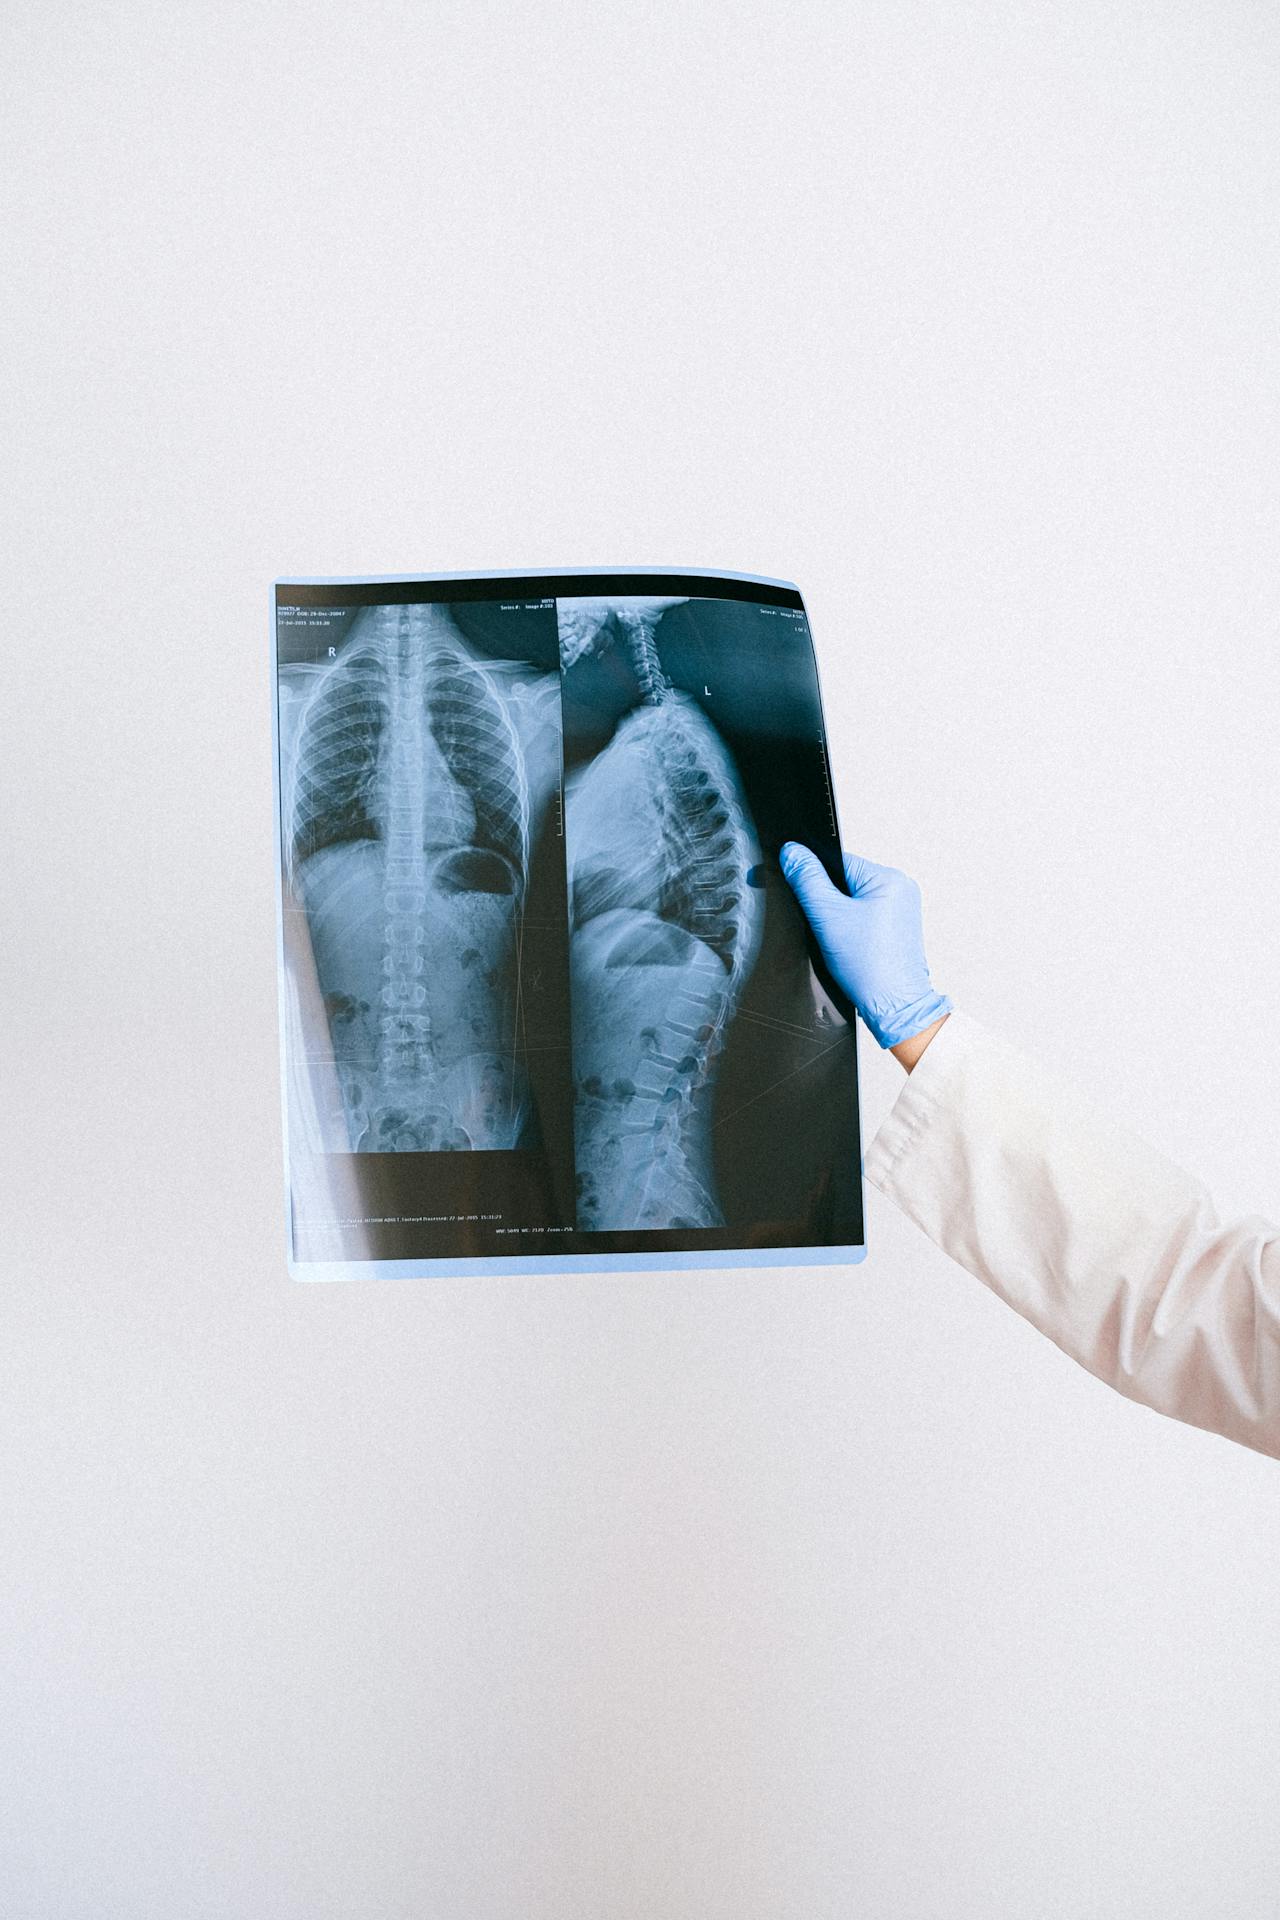 A medical worker examines an X-ray of a patient’s lungs.